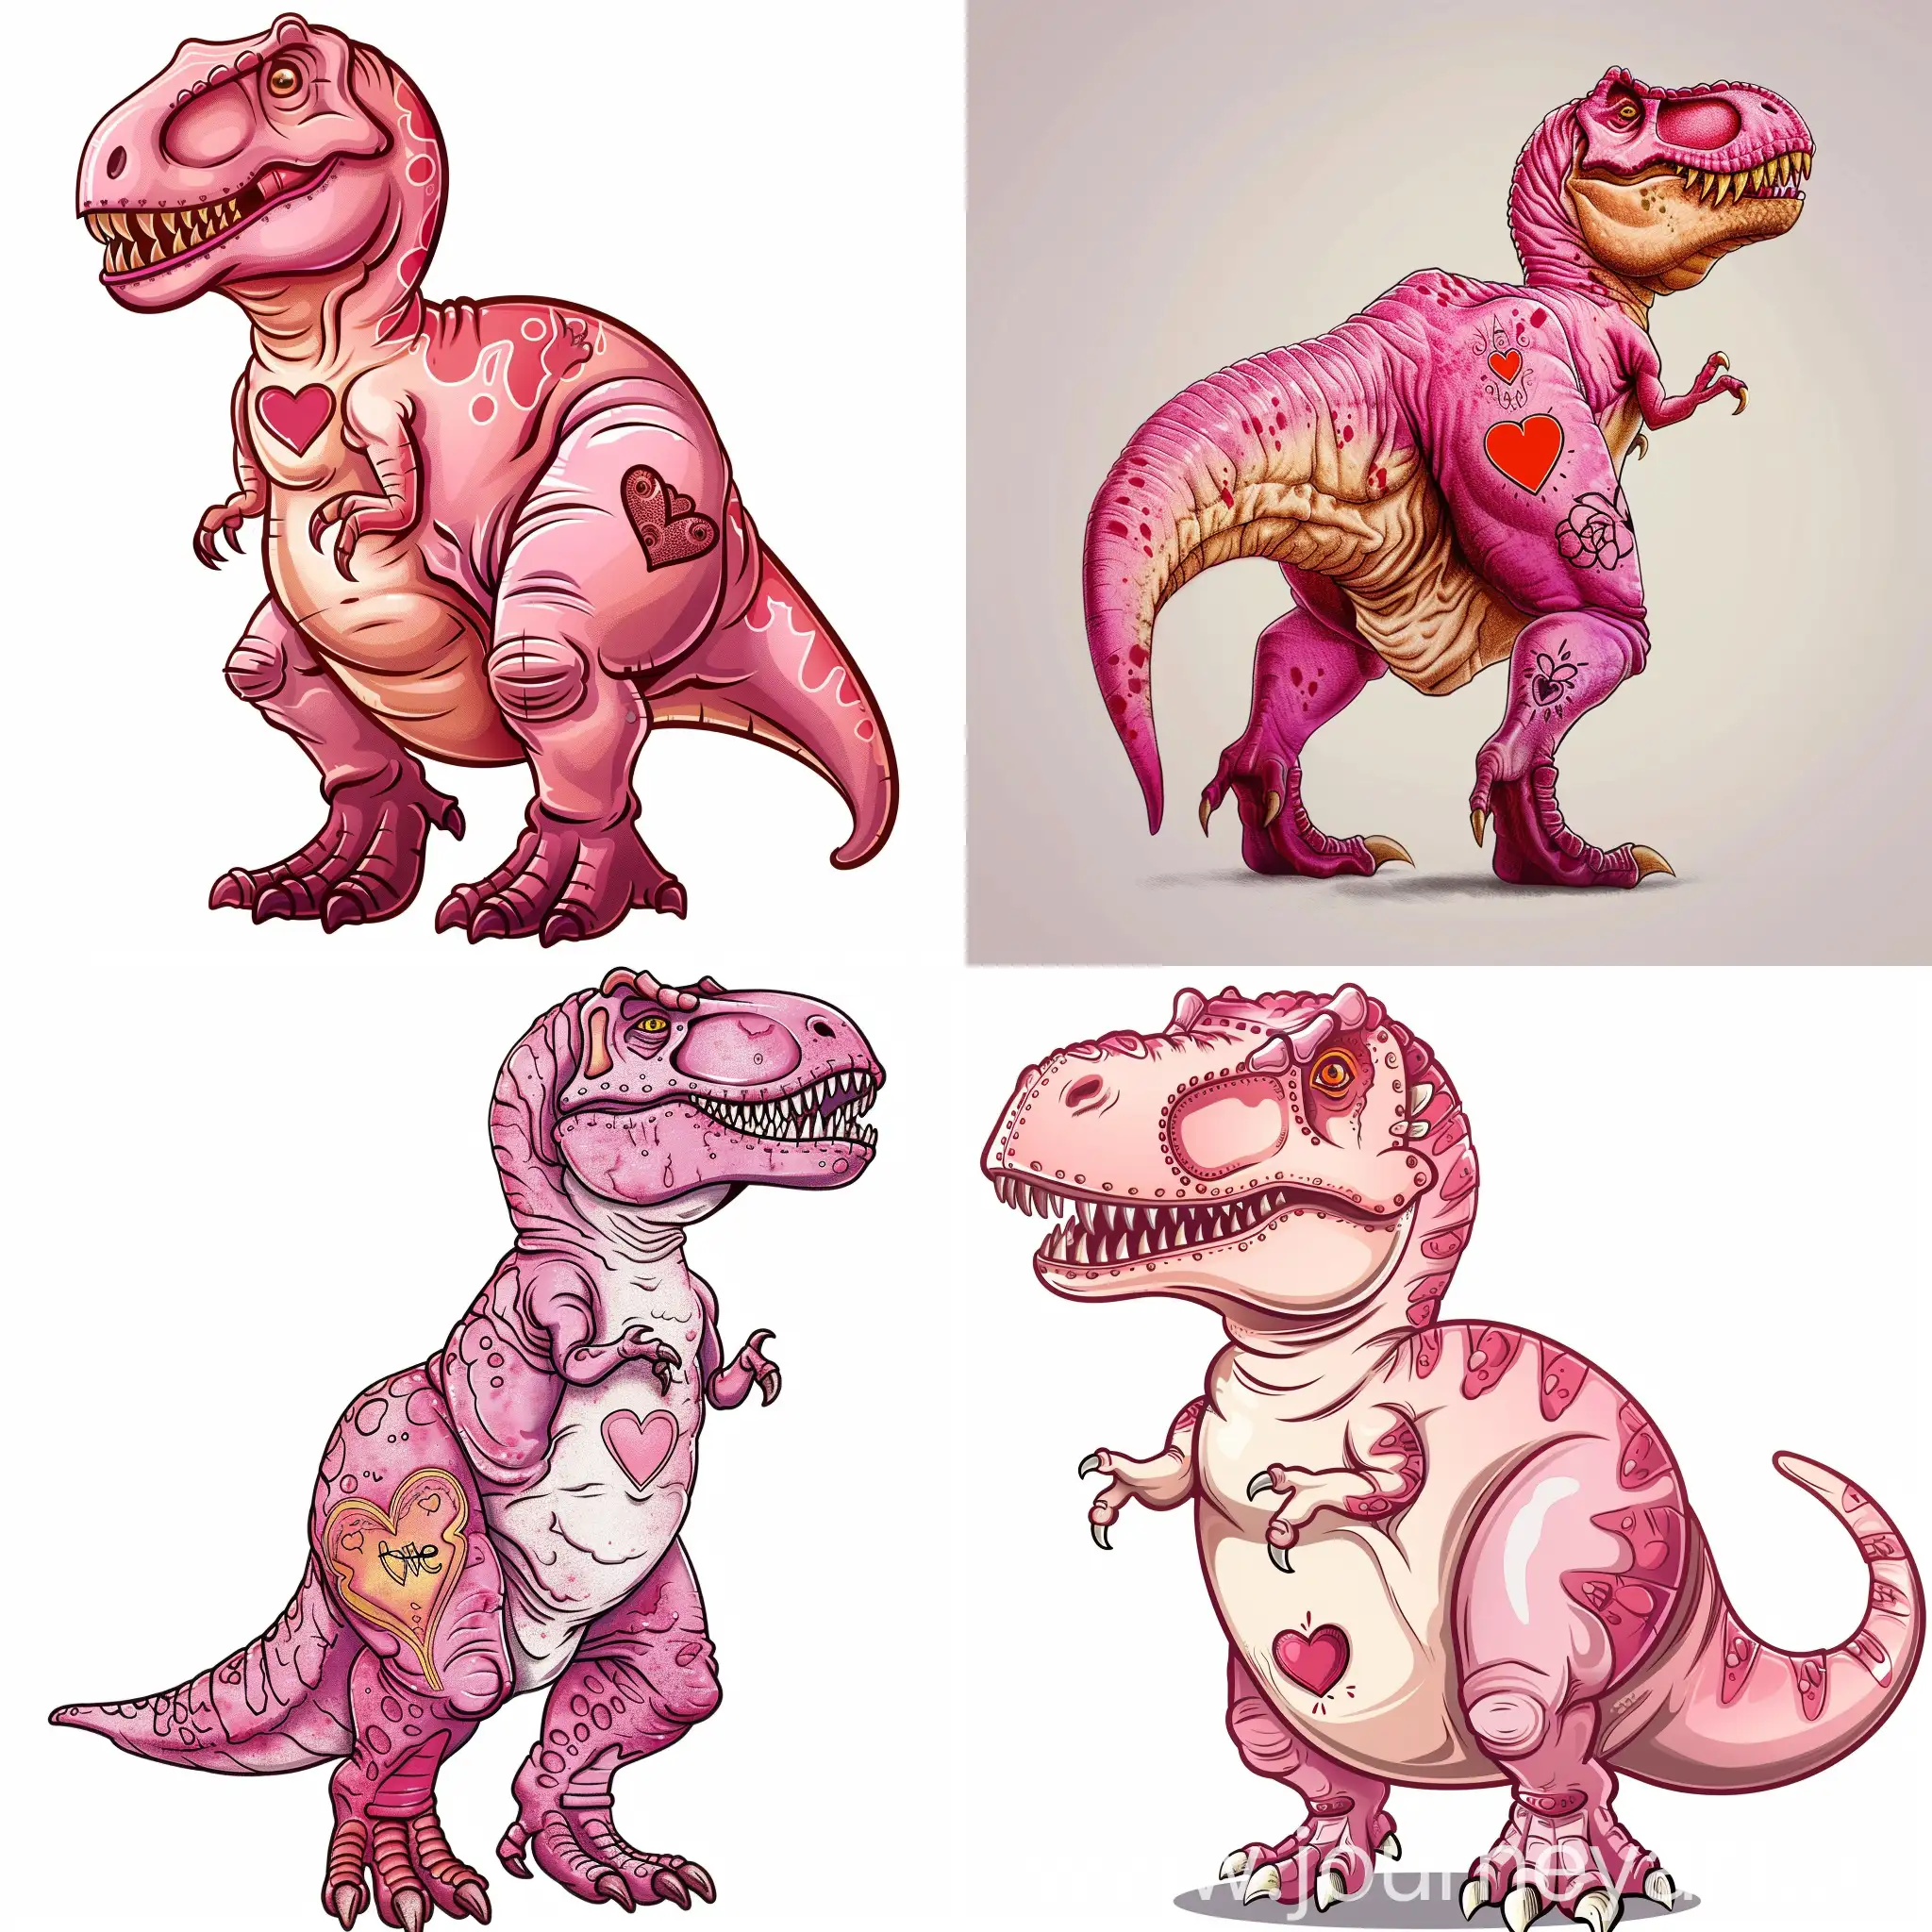 Great and pink T-rex with a love heart tatoo on its bum